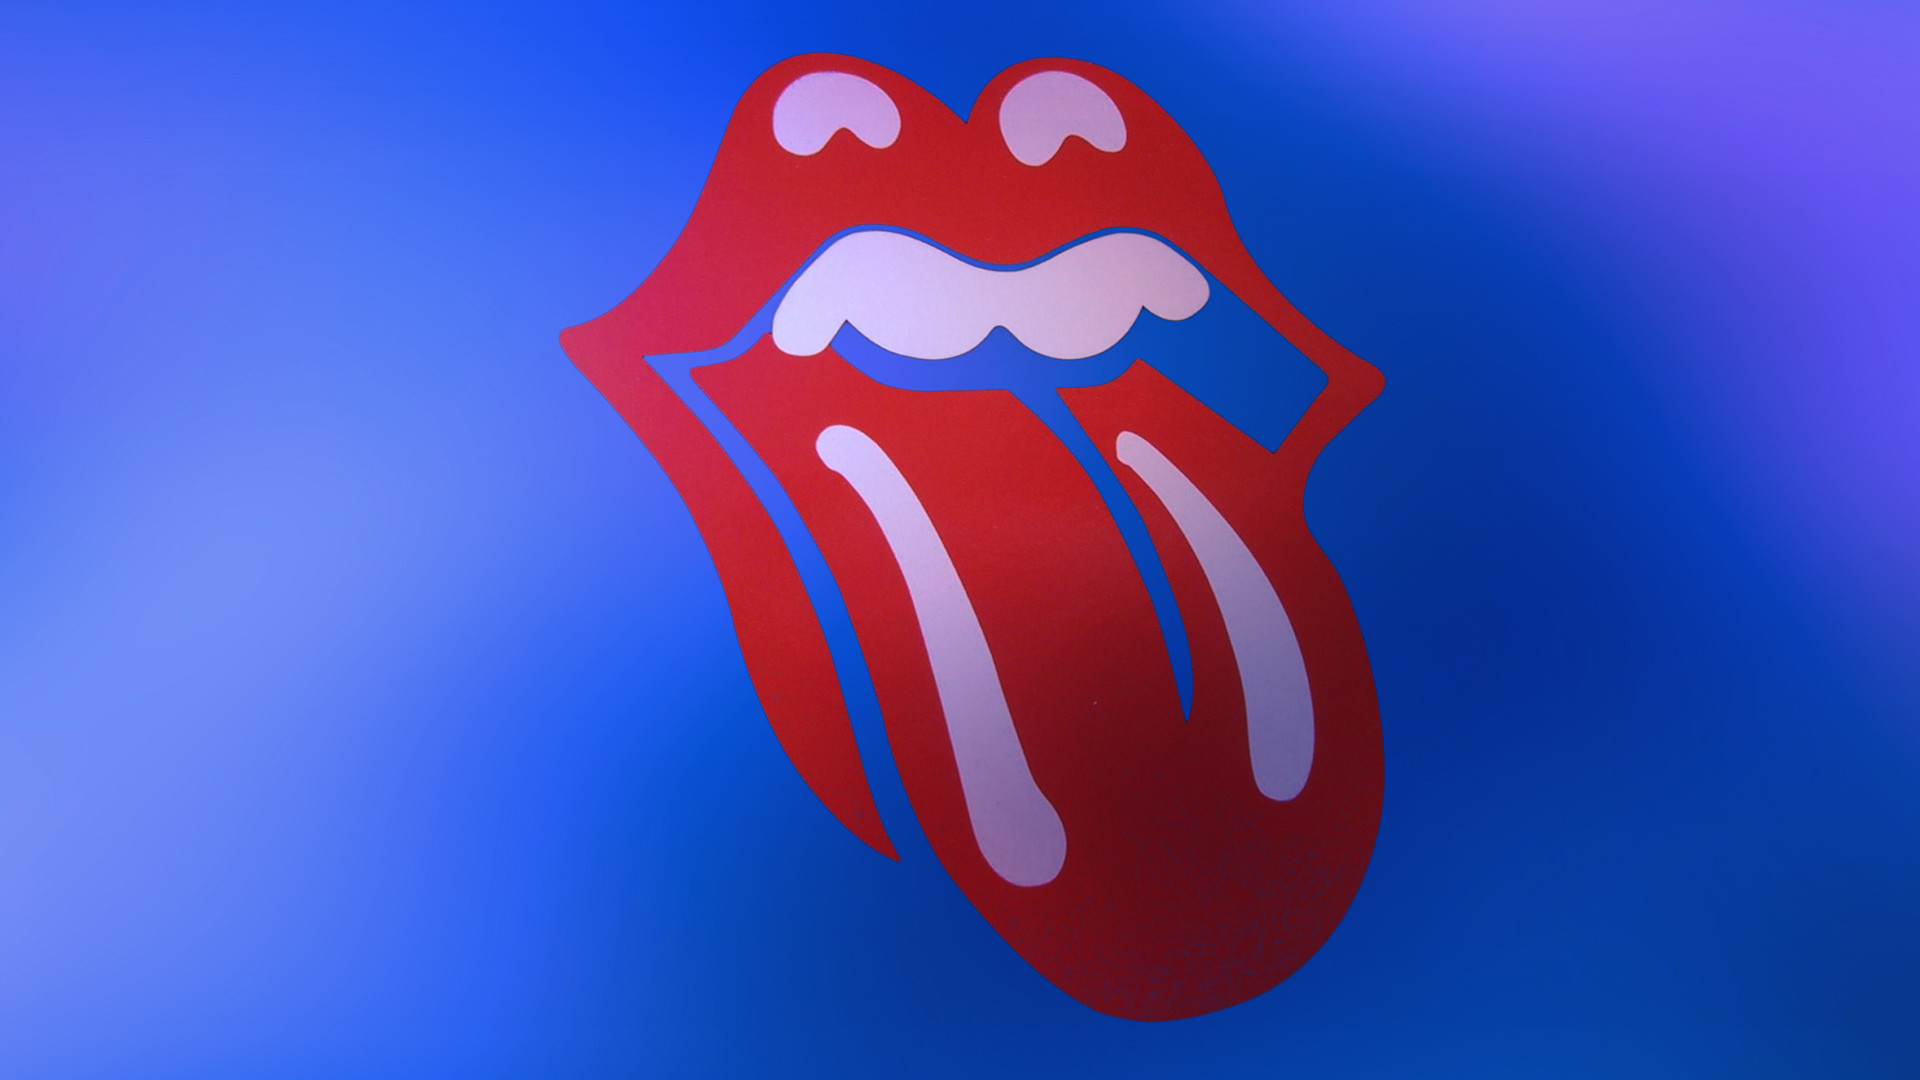 1920x1080 Music - The Rolling Stones Wallpaper